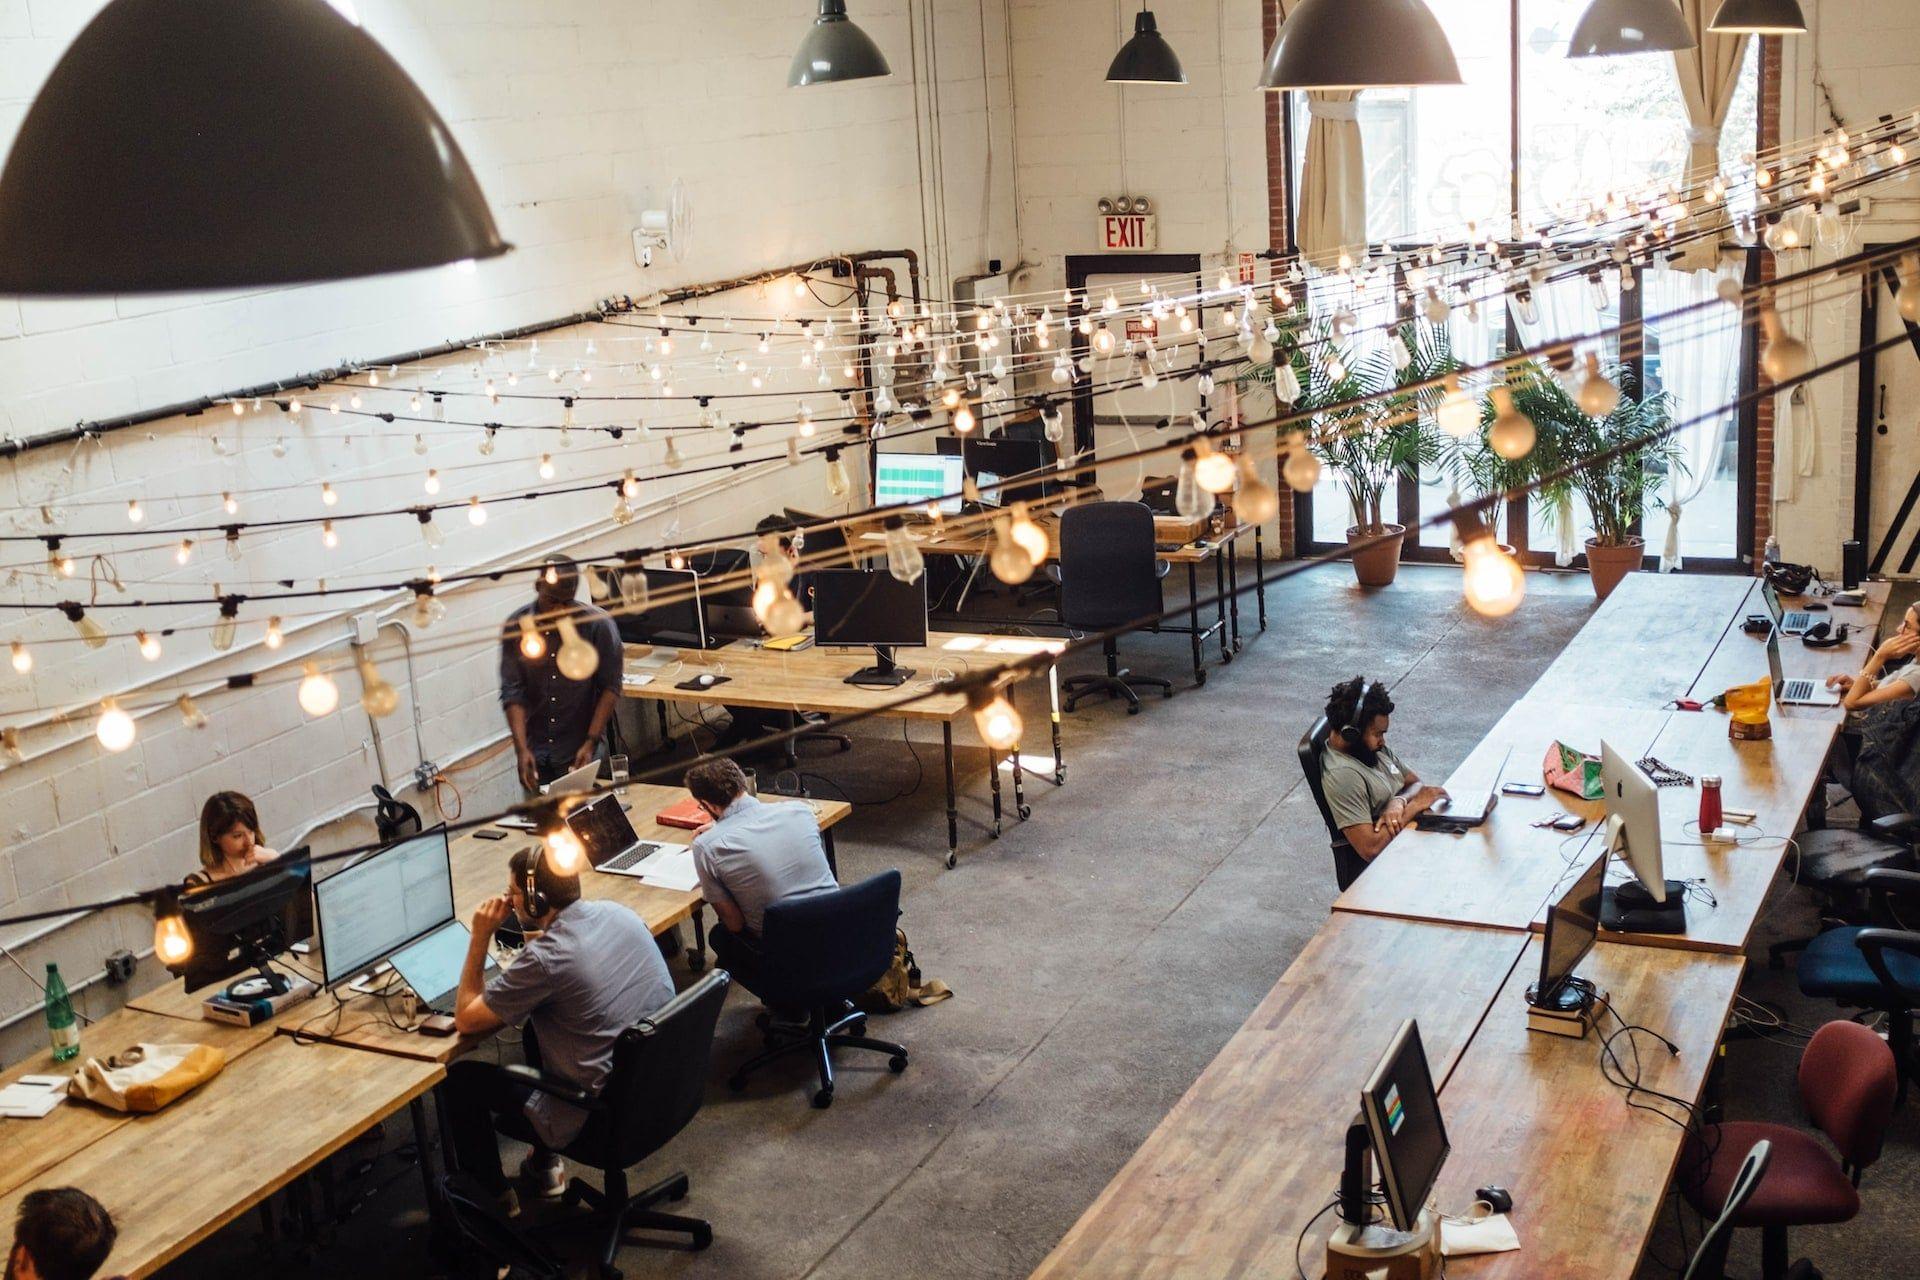 Shared Workspaces VS Coworking Spaces – What Are the Differences?